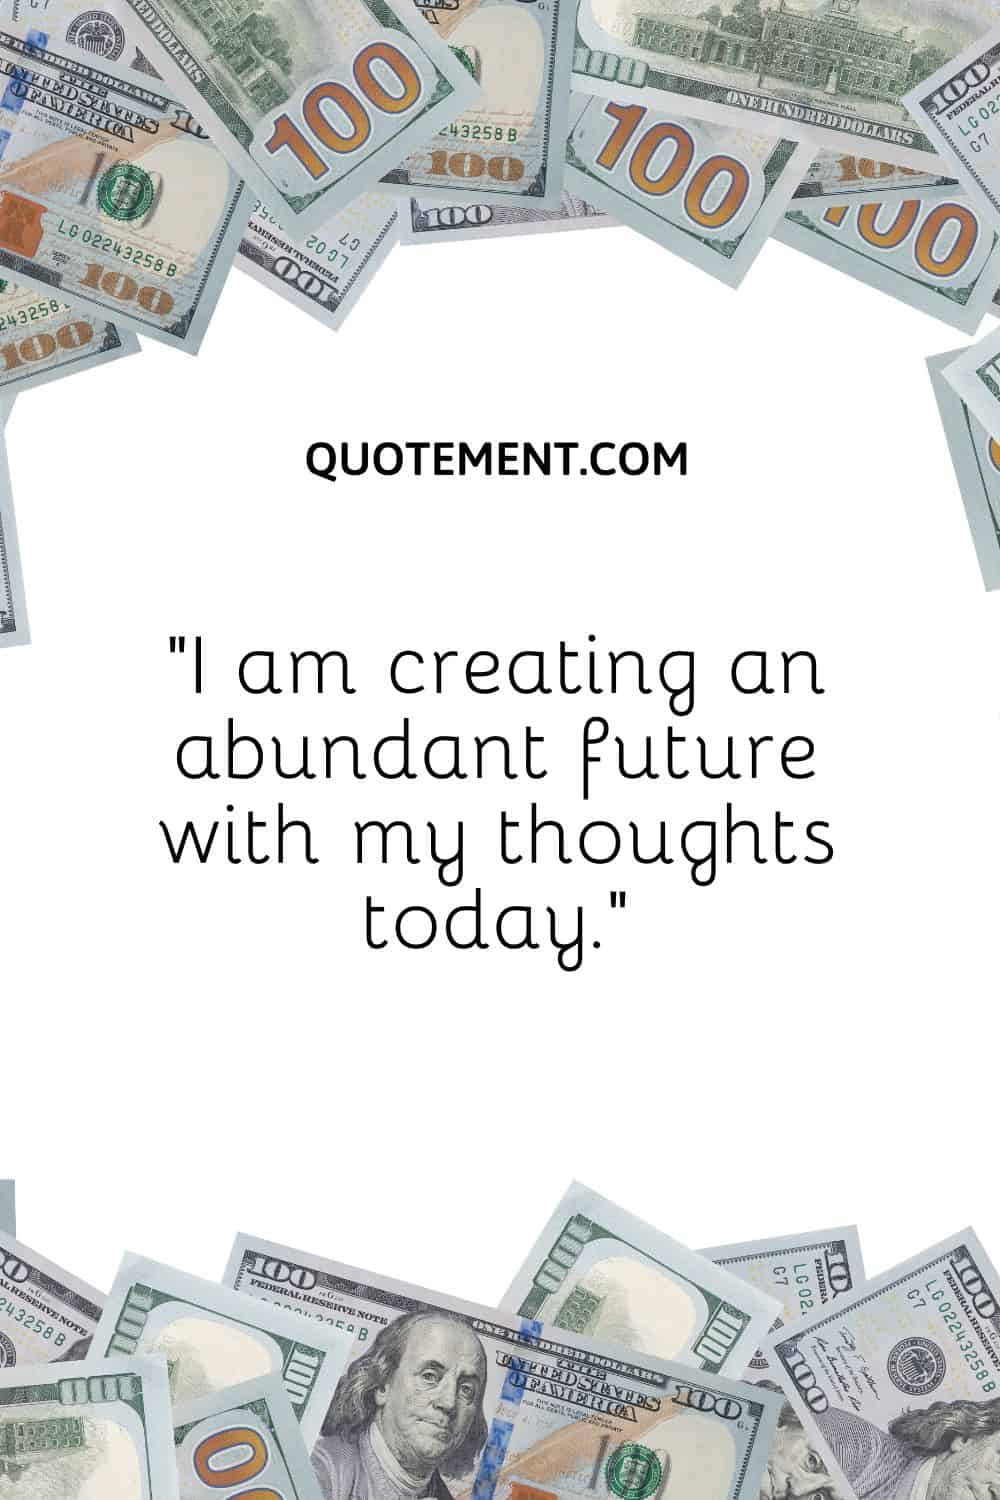 “I am creating an abundant future with my thoughts today.”